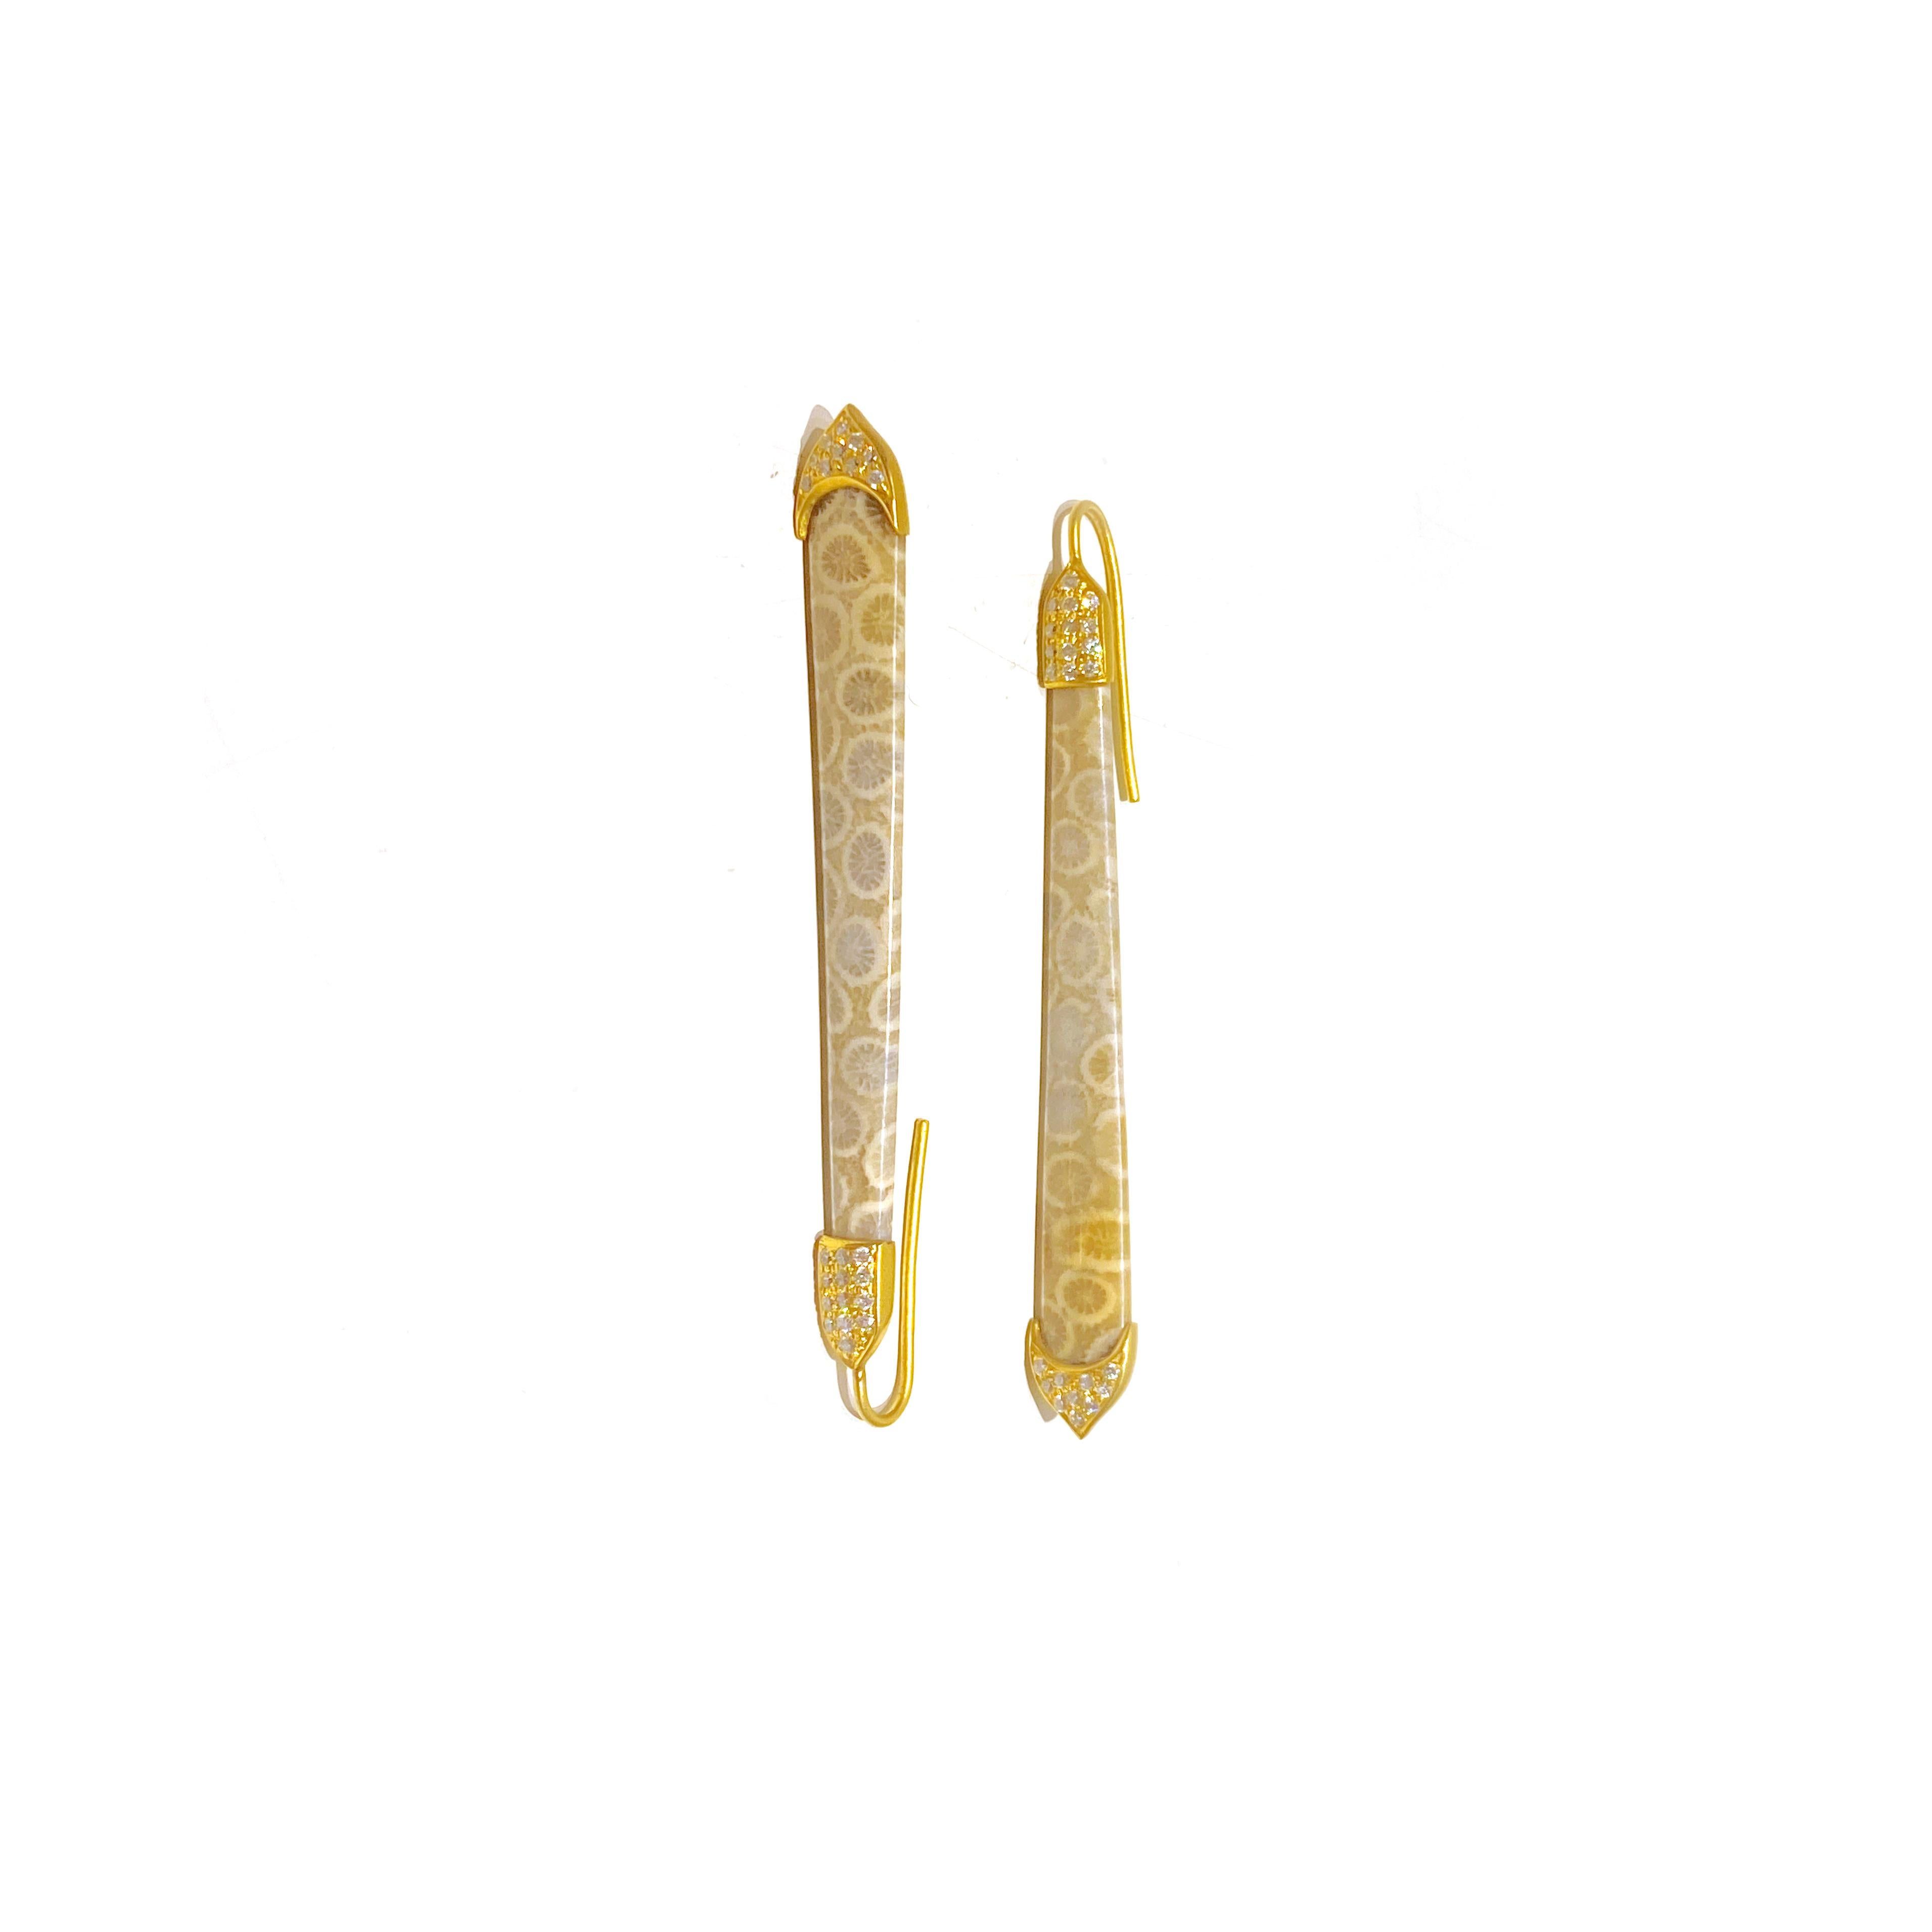 These earrings feature a unique design with fossilized corals, diamonds, and yellow gold. 

Details
Fossilized Corals 
Diamonds 0.53 ct. 
18K Yellow Gold
Length 2.65 inches 
